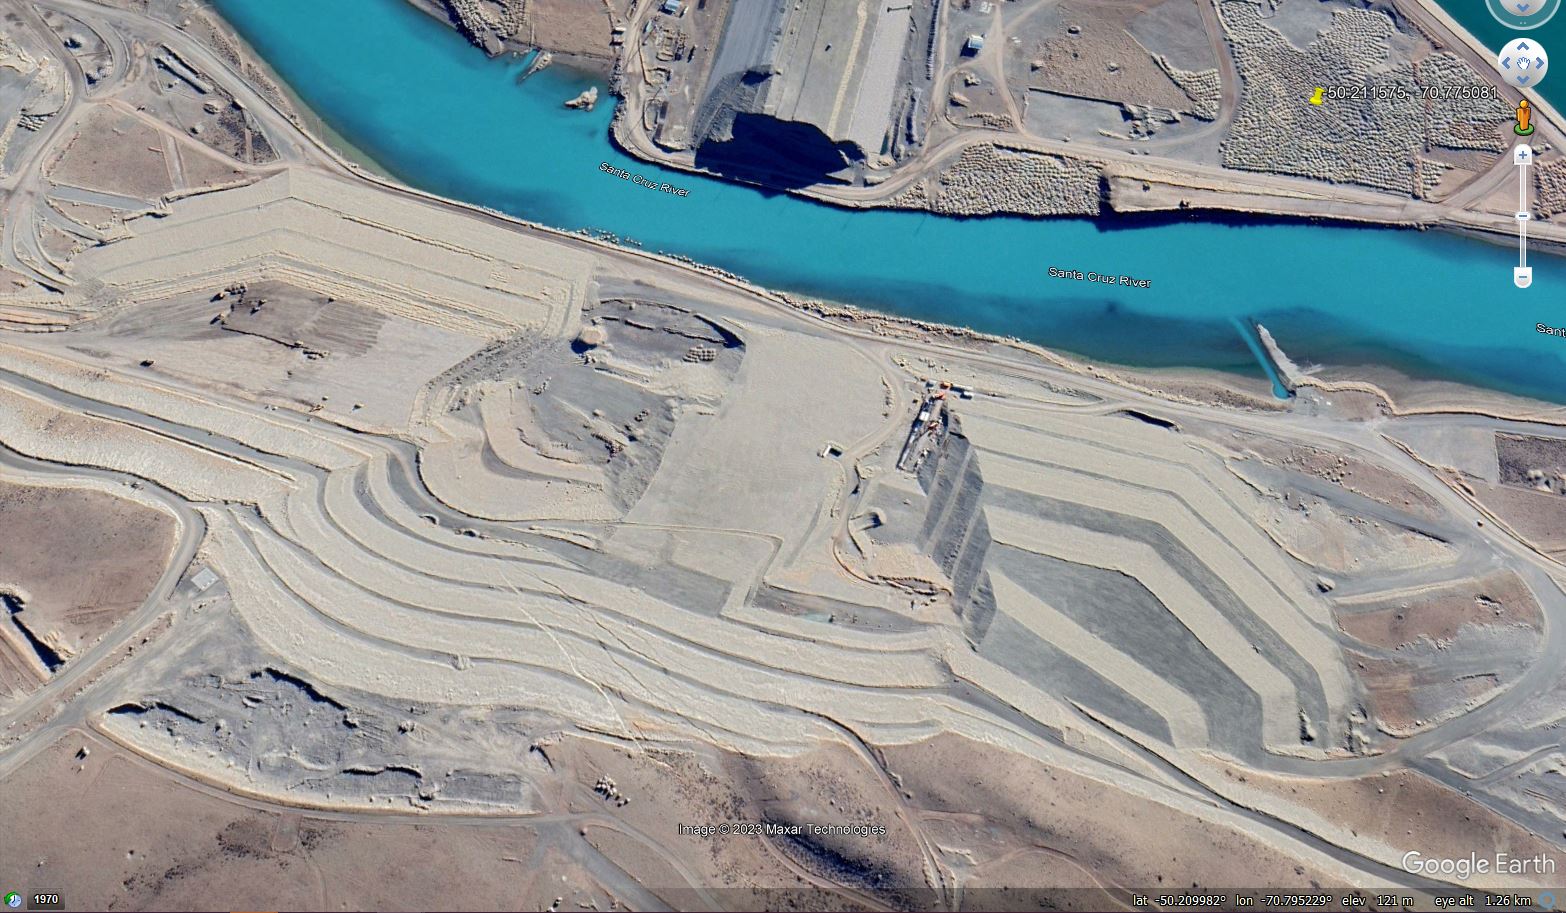 Google Earth image of the groundworks at the Cóndor Cliff Dam in Argentina, possibly in May 2022.